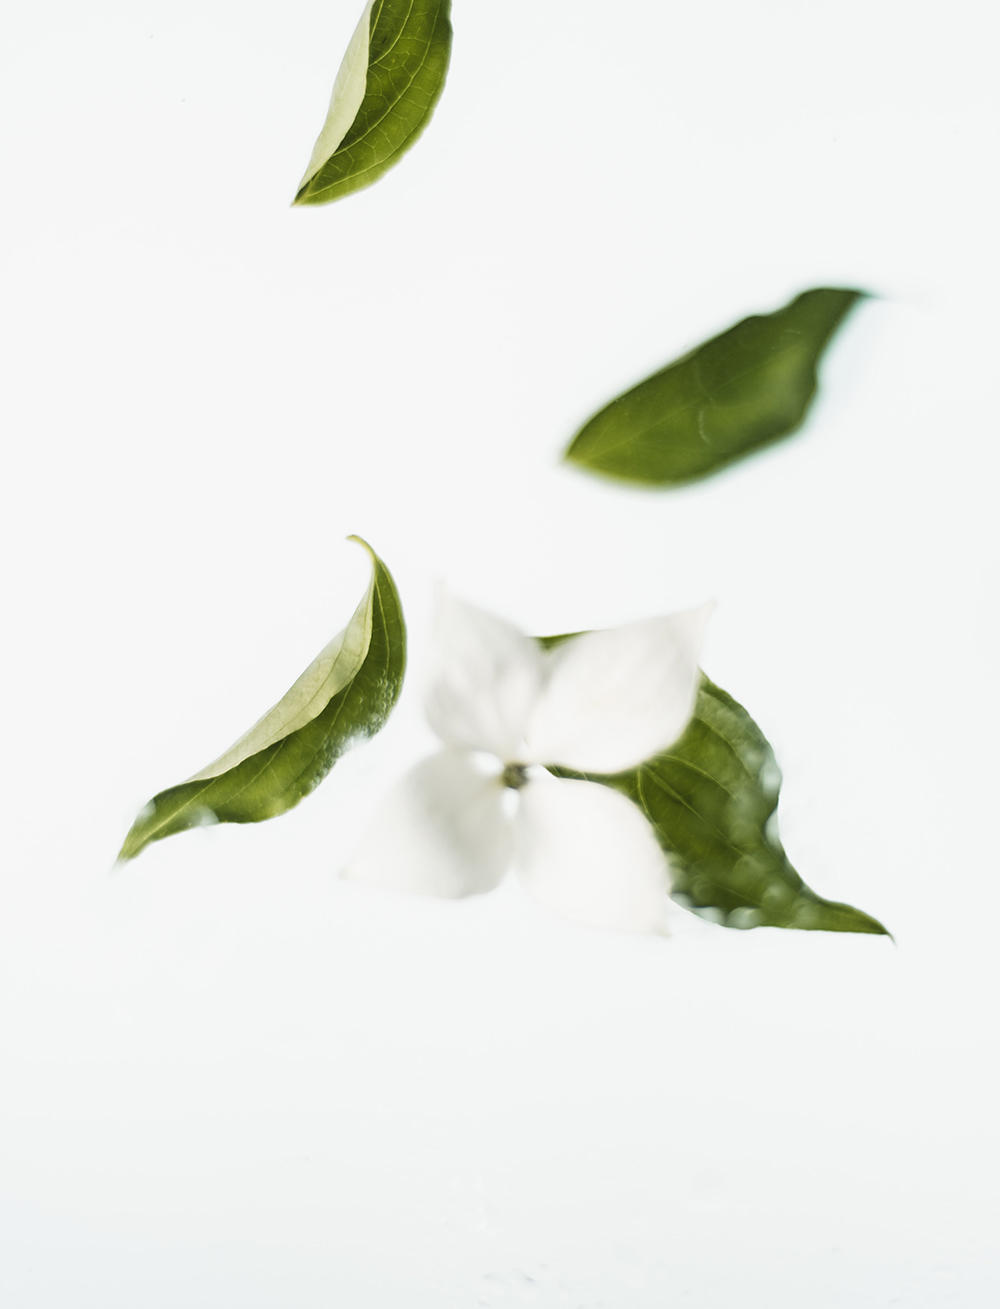 Falling green leaves and white flowers on a white background